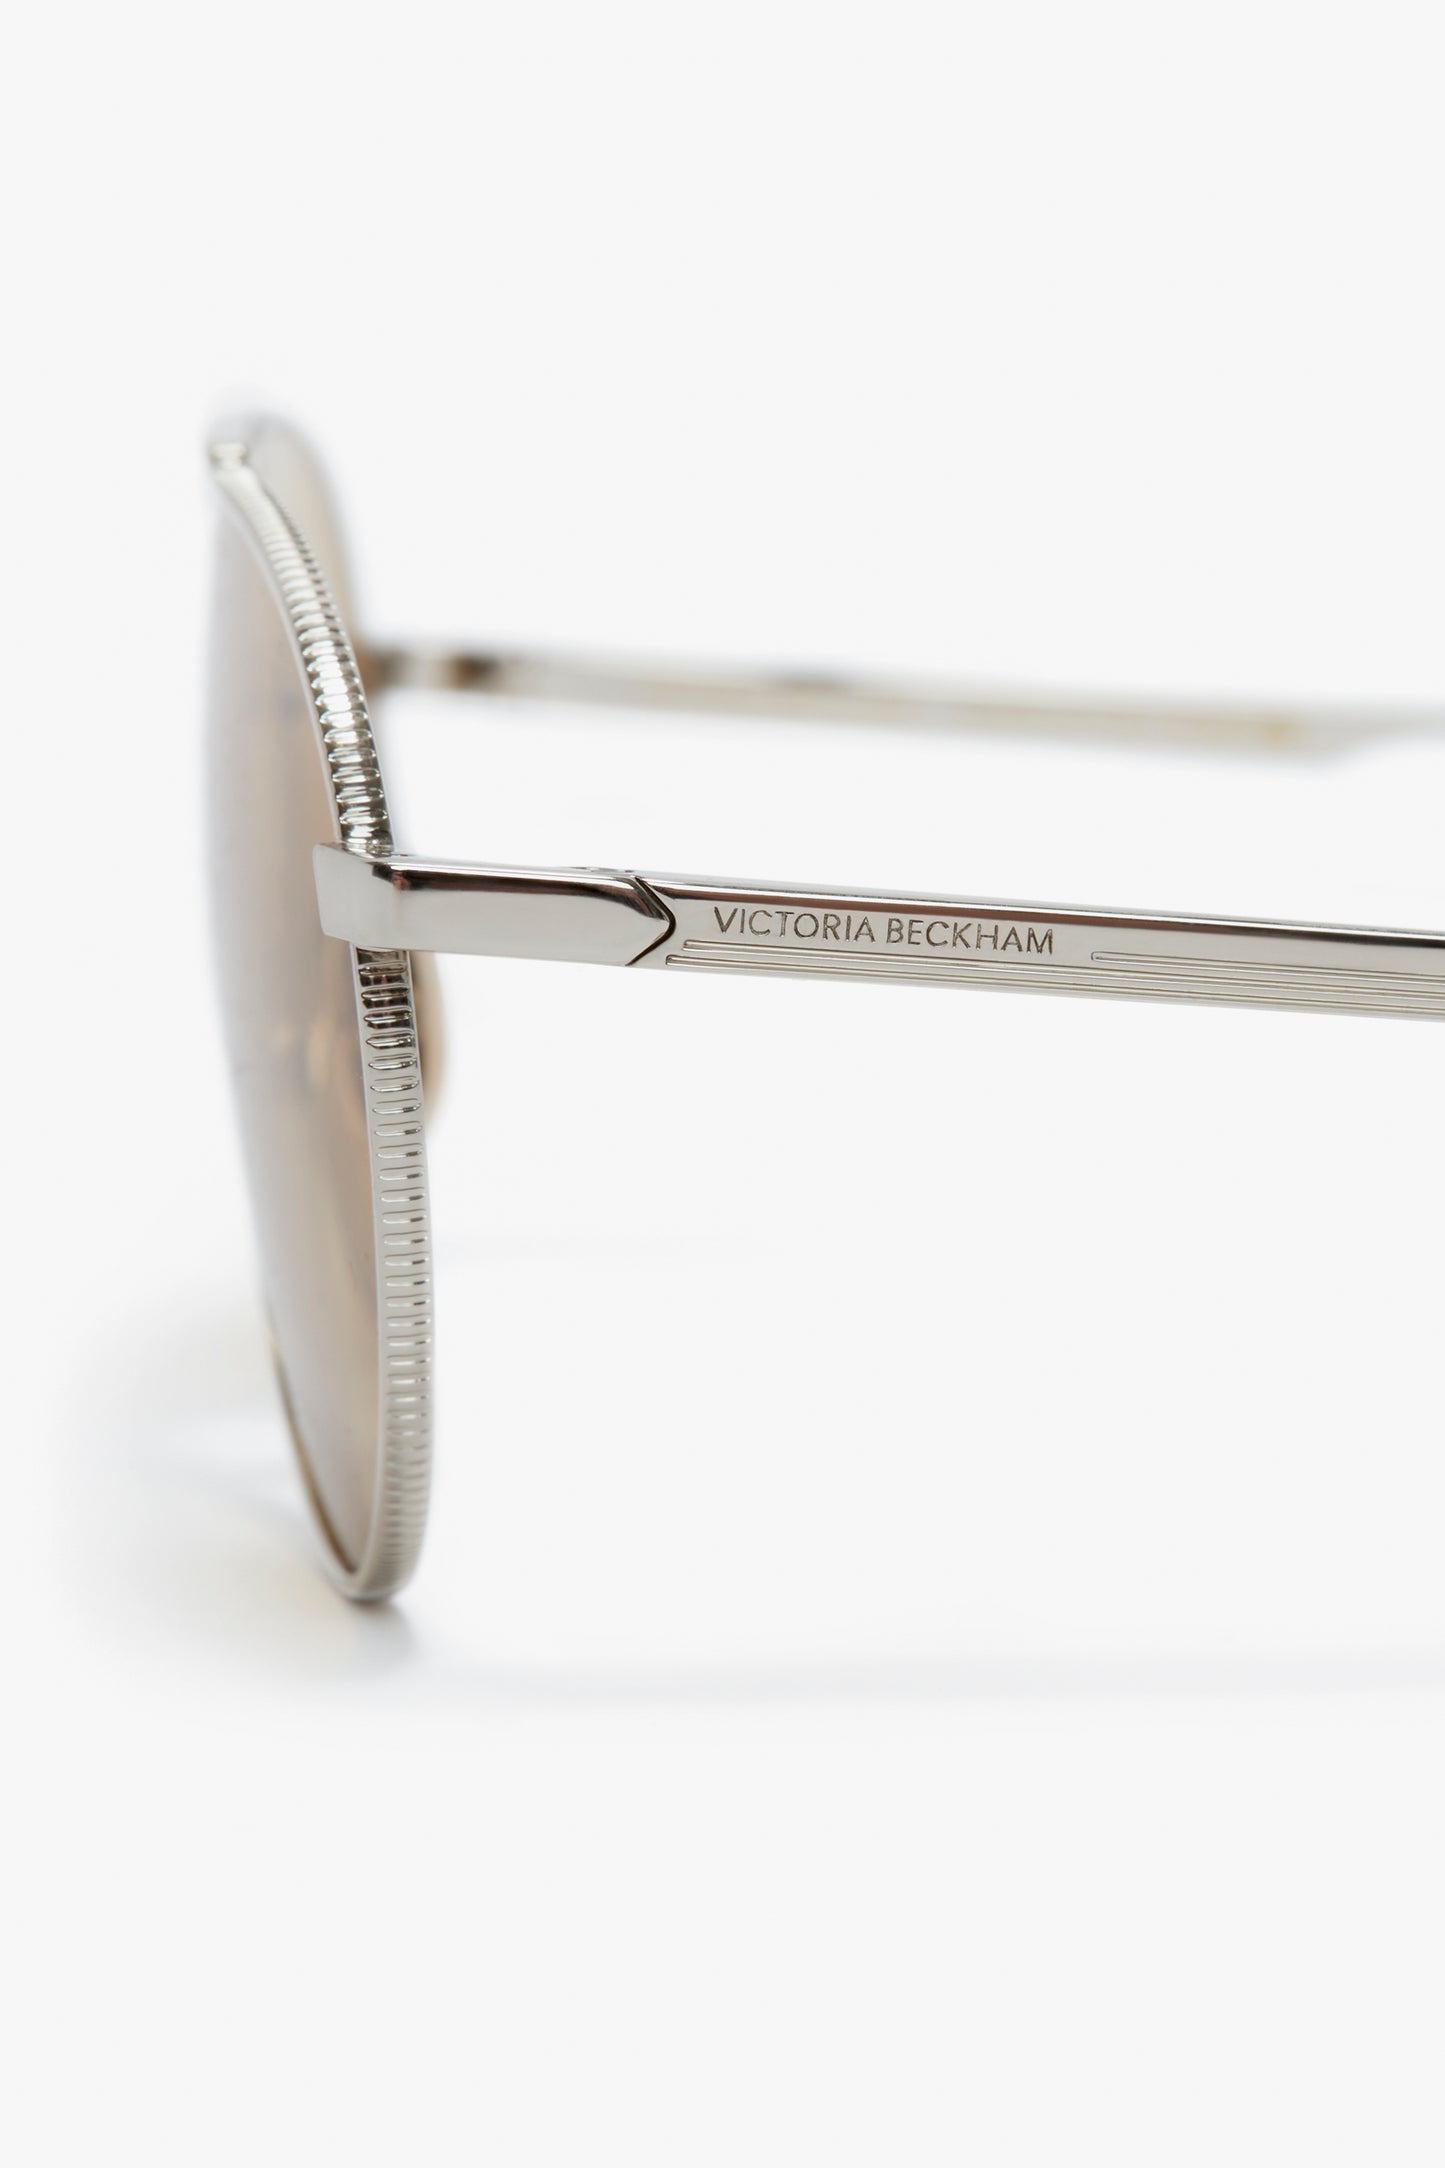 Close-up view of the side of a pair of Italian crafted Victoria Beckham V Metal Pilot Sunglasses In Silver-Brown, showing the brand name engraved on the temple, against a white background.